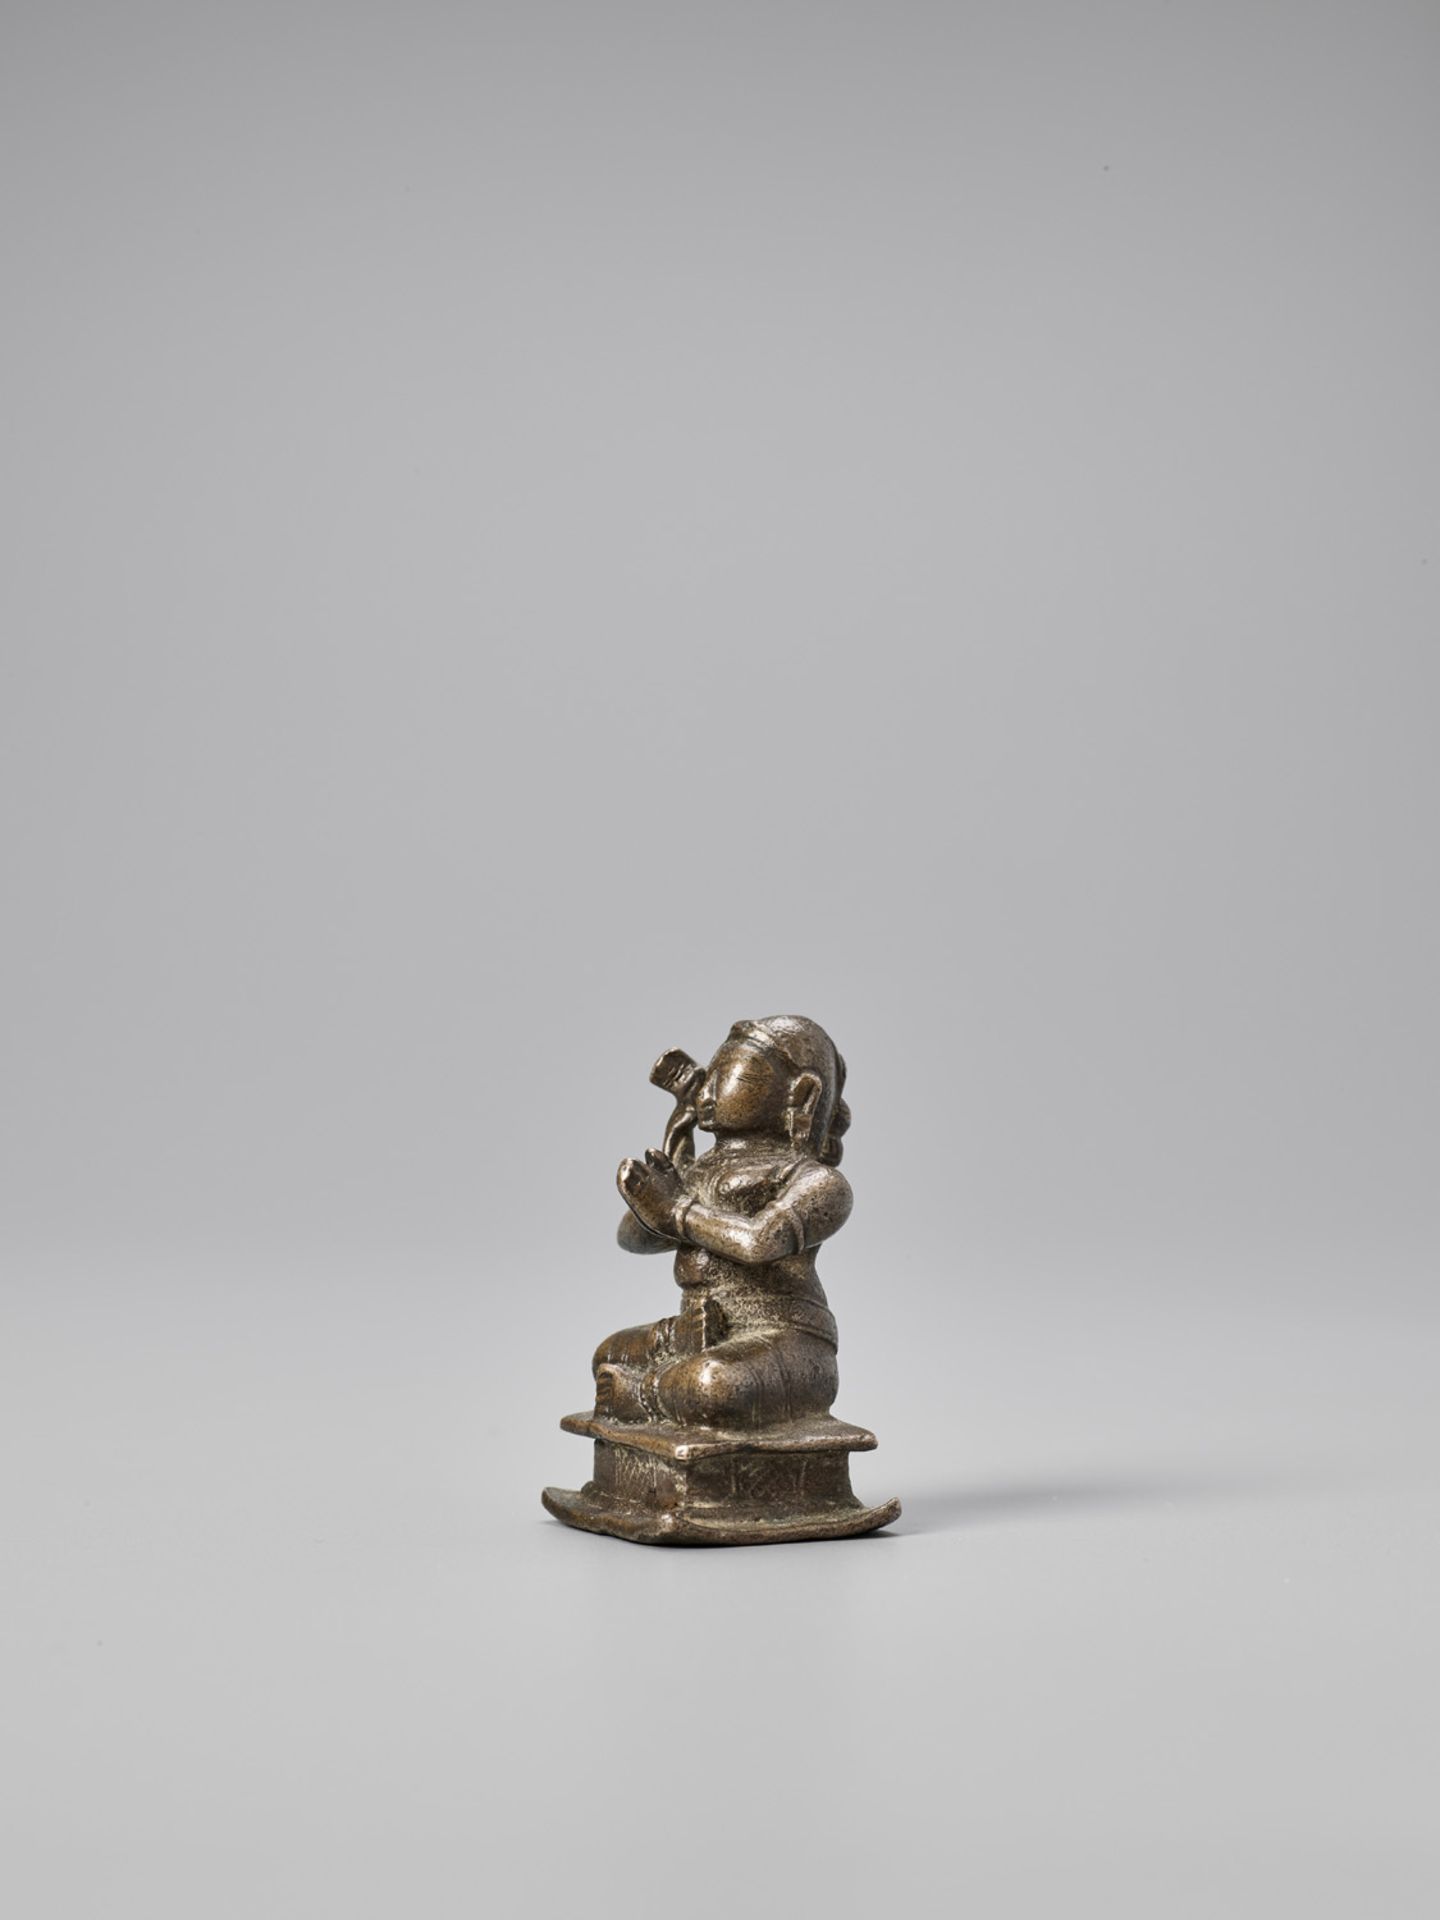 TWO SMALL INDIAN BRONZE FIGURES, 19TH CENTURY - Image 7 of 10